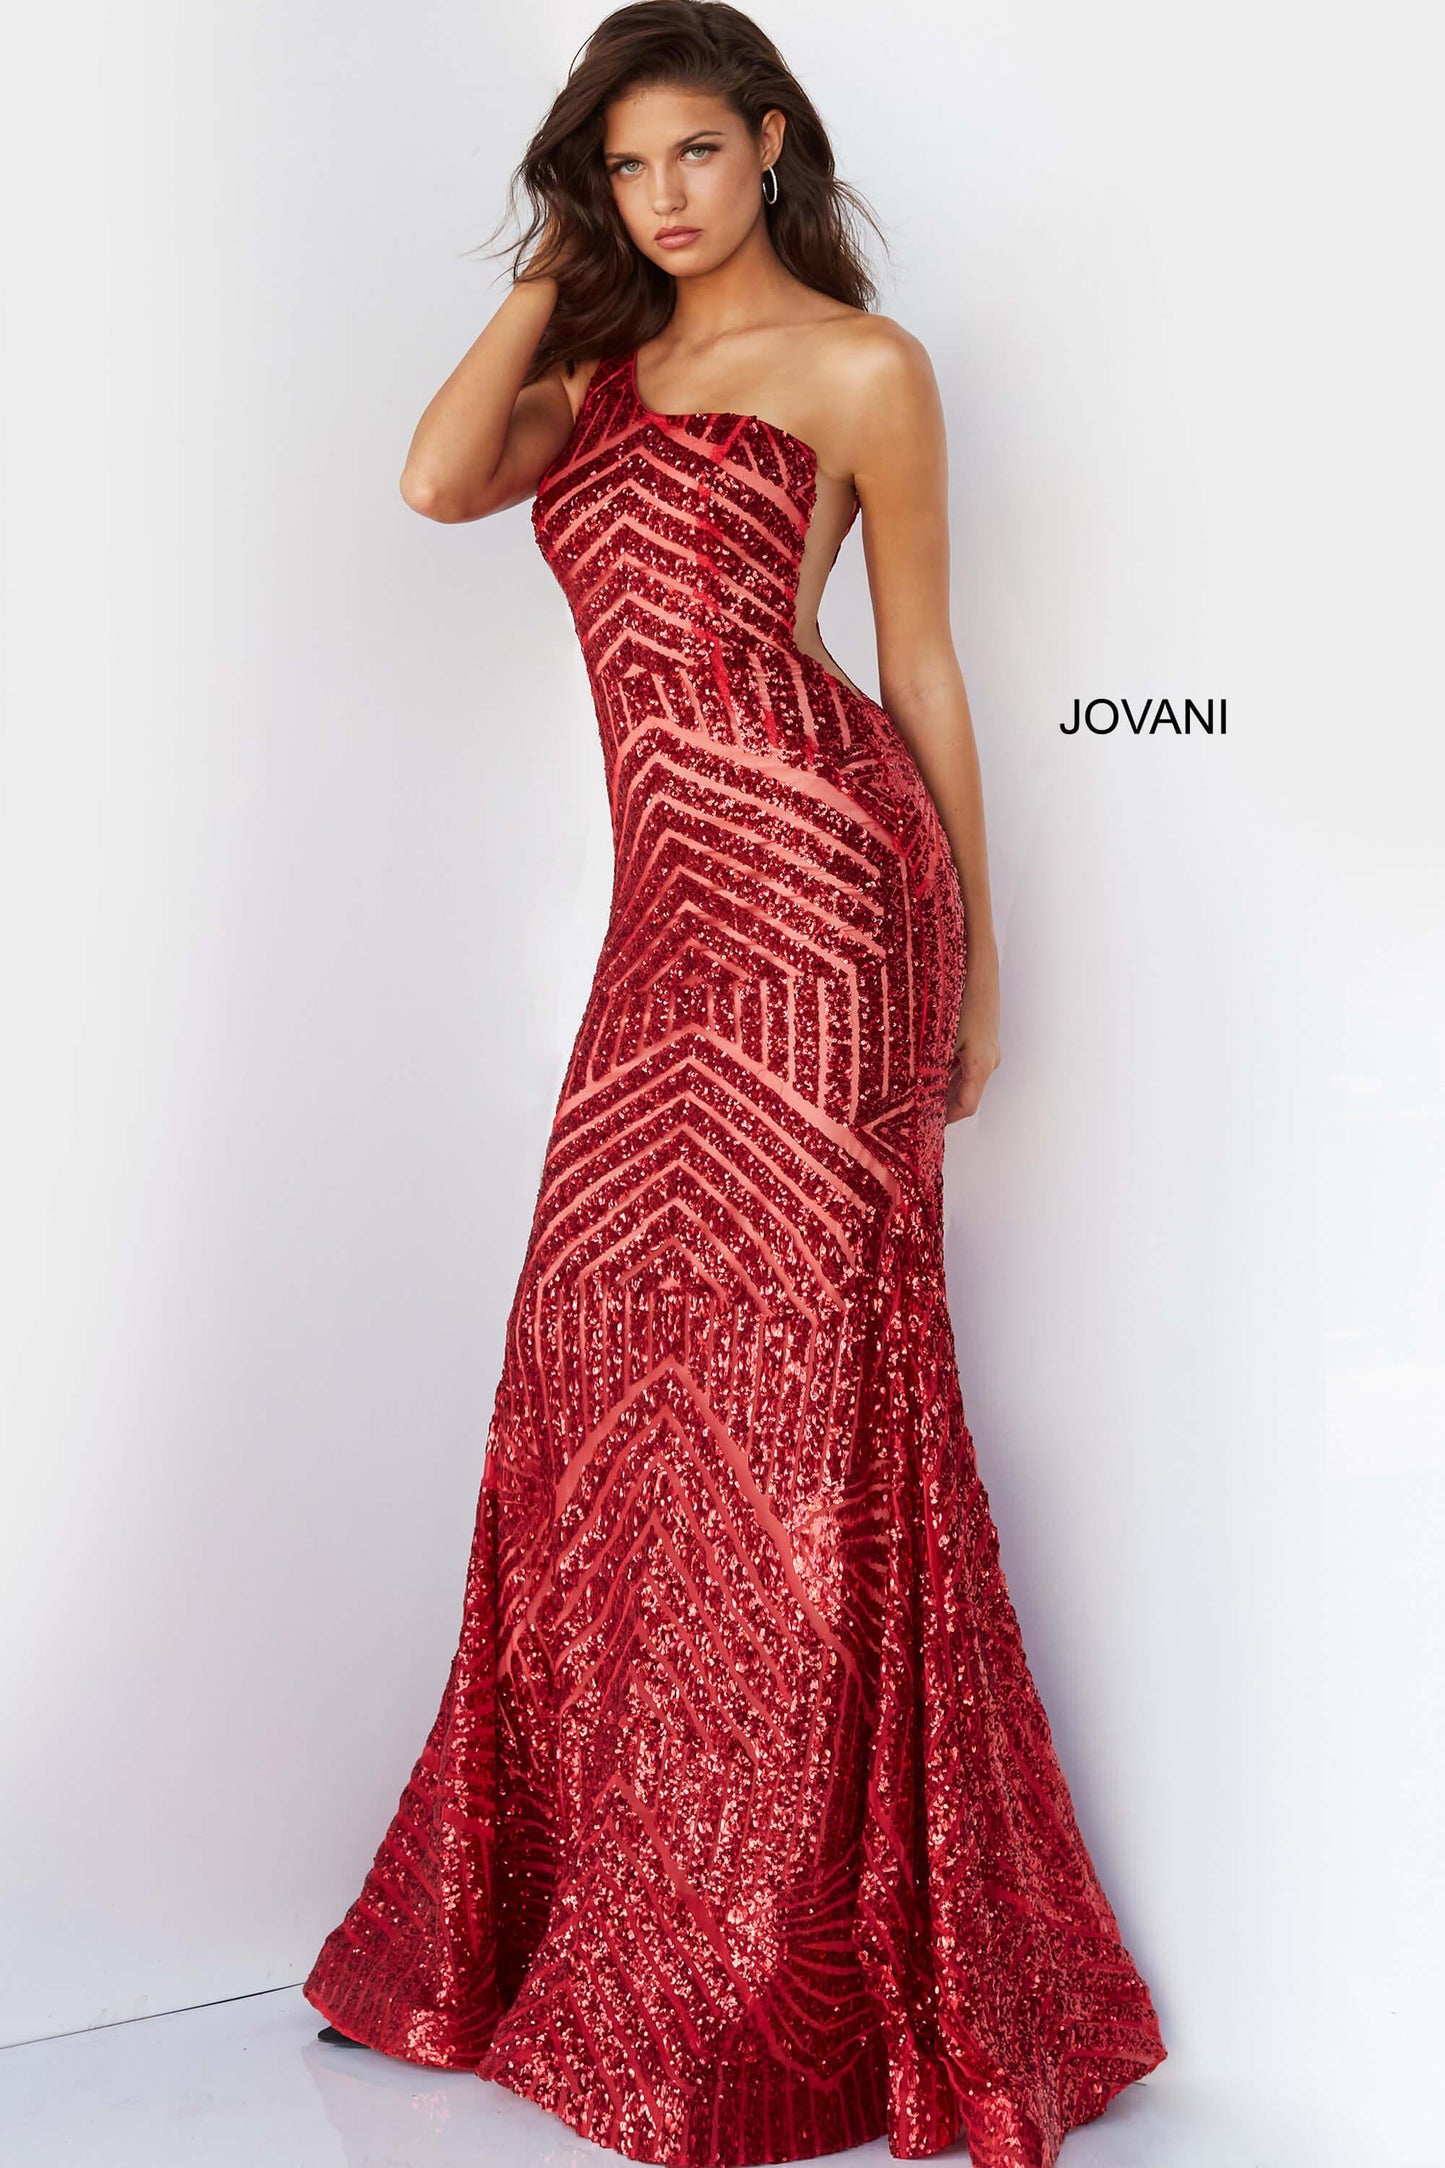 Jovani One Shoulder Long Prom Gown 06017 - The Dress Outlet